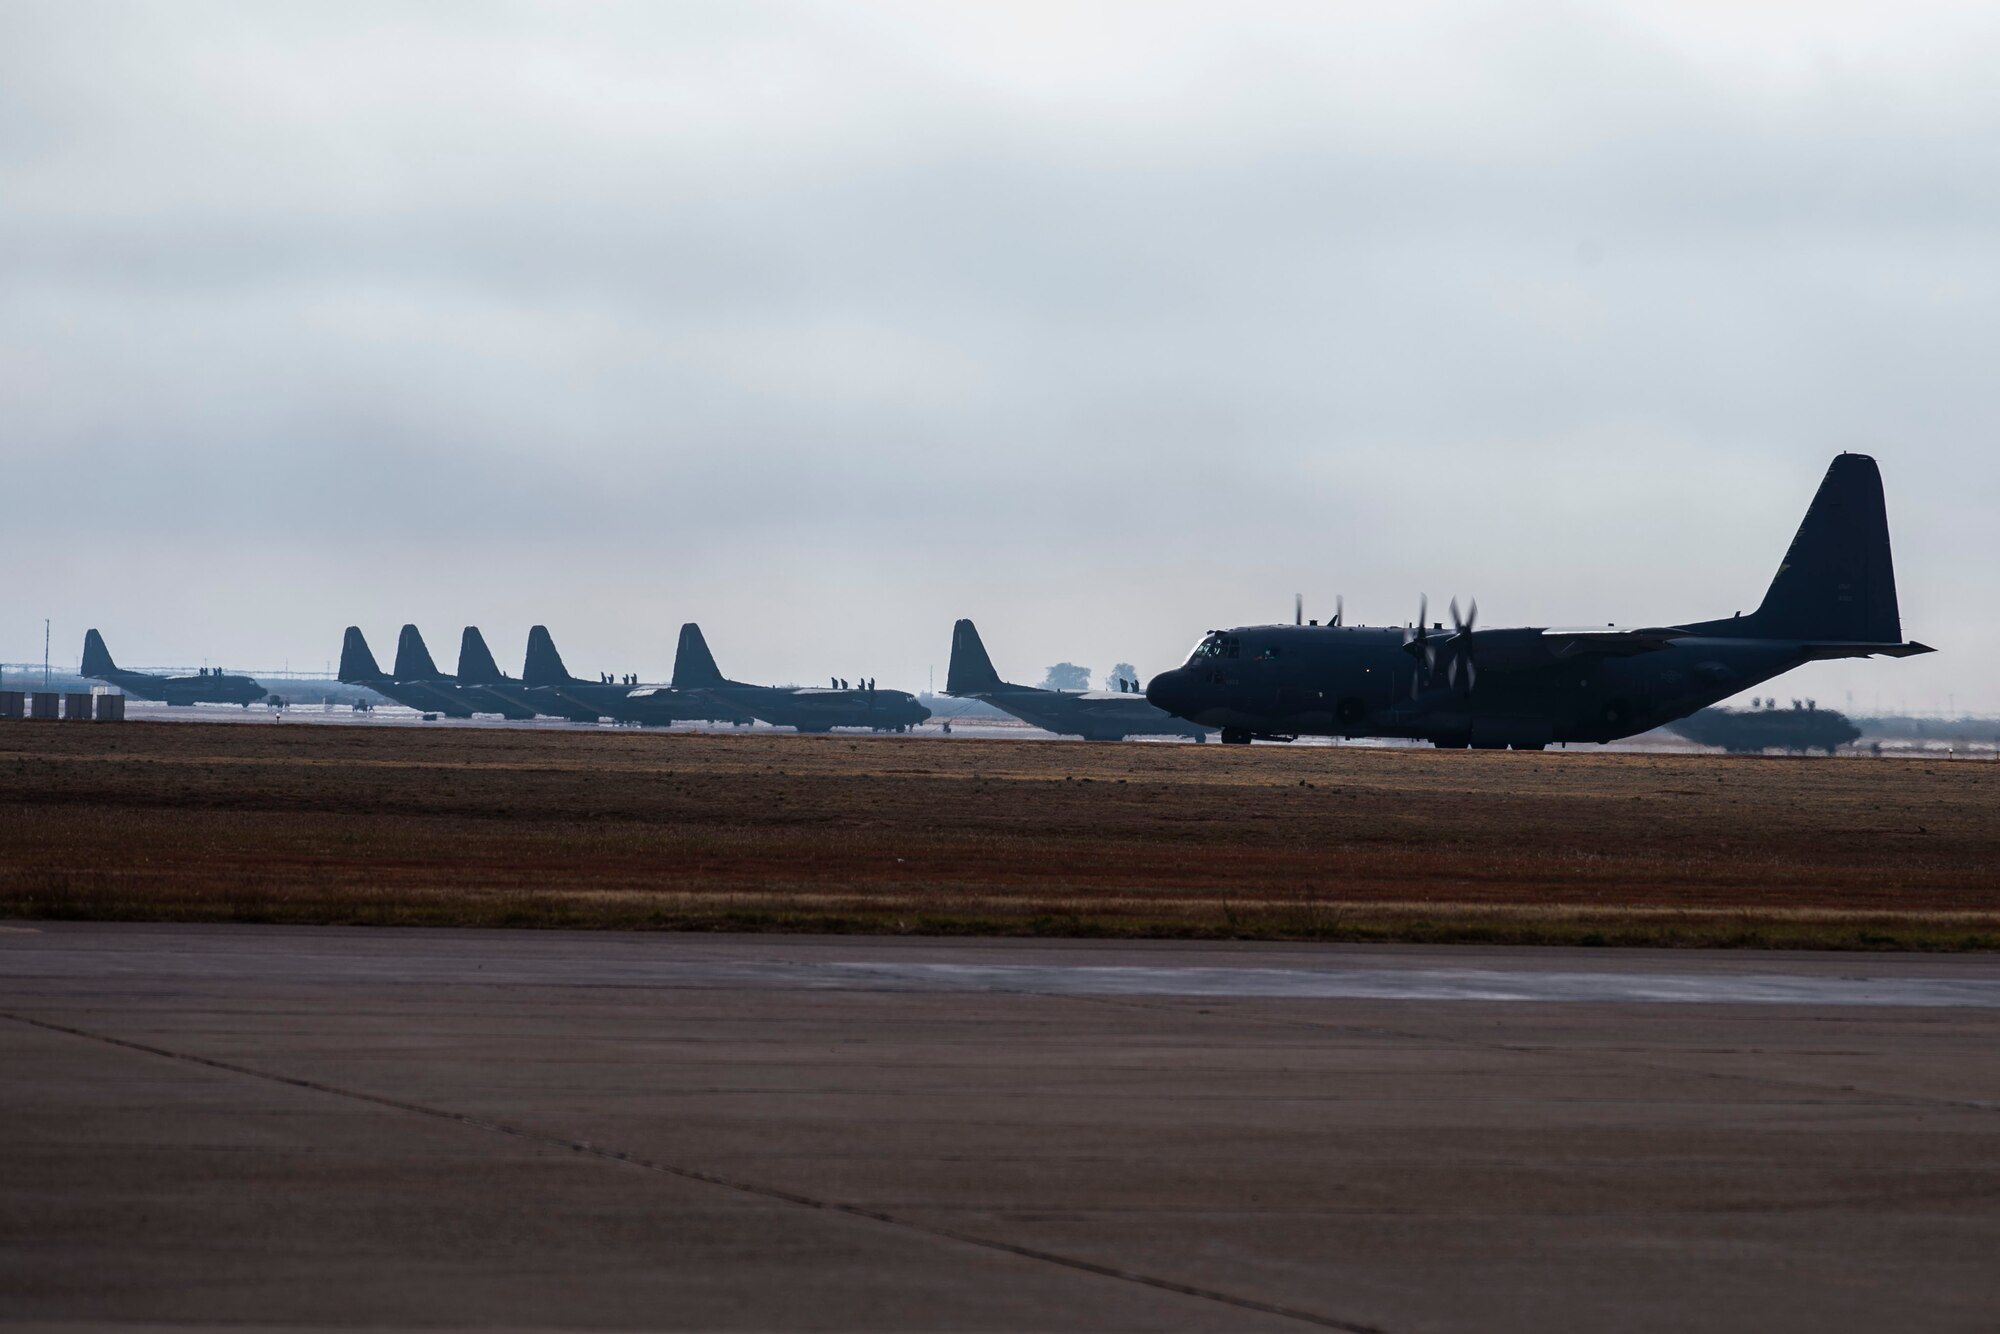 An AC-130W Stinger II gunship, Tail No. 1303, right, taxis the runway at Cannon Air Force Base, N.M., before its final flight prior to retirement Oct. 19, 2020. The Air Force received the aircraft from the Lockheed-Martin factory June 6, 1989, with the original nickname of ‘City of Hurricane.’ (U.S. Air Force photo by Staff Sgt. Luke Kitterman)